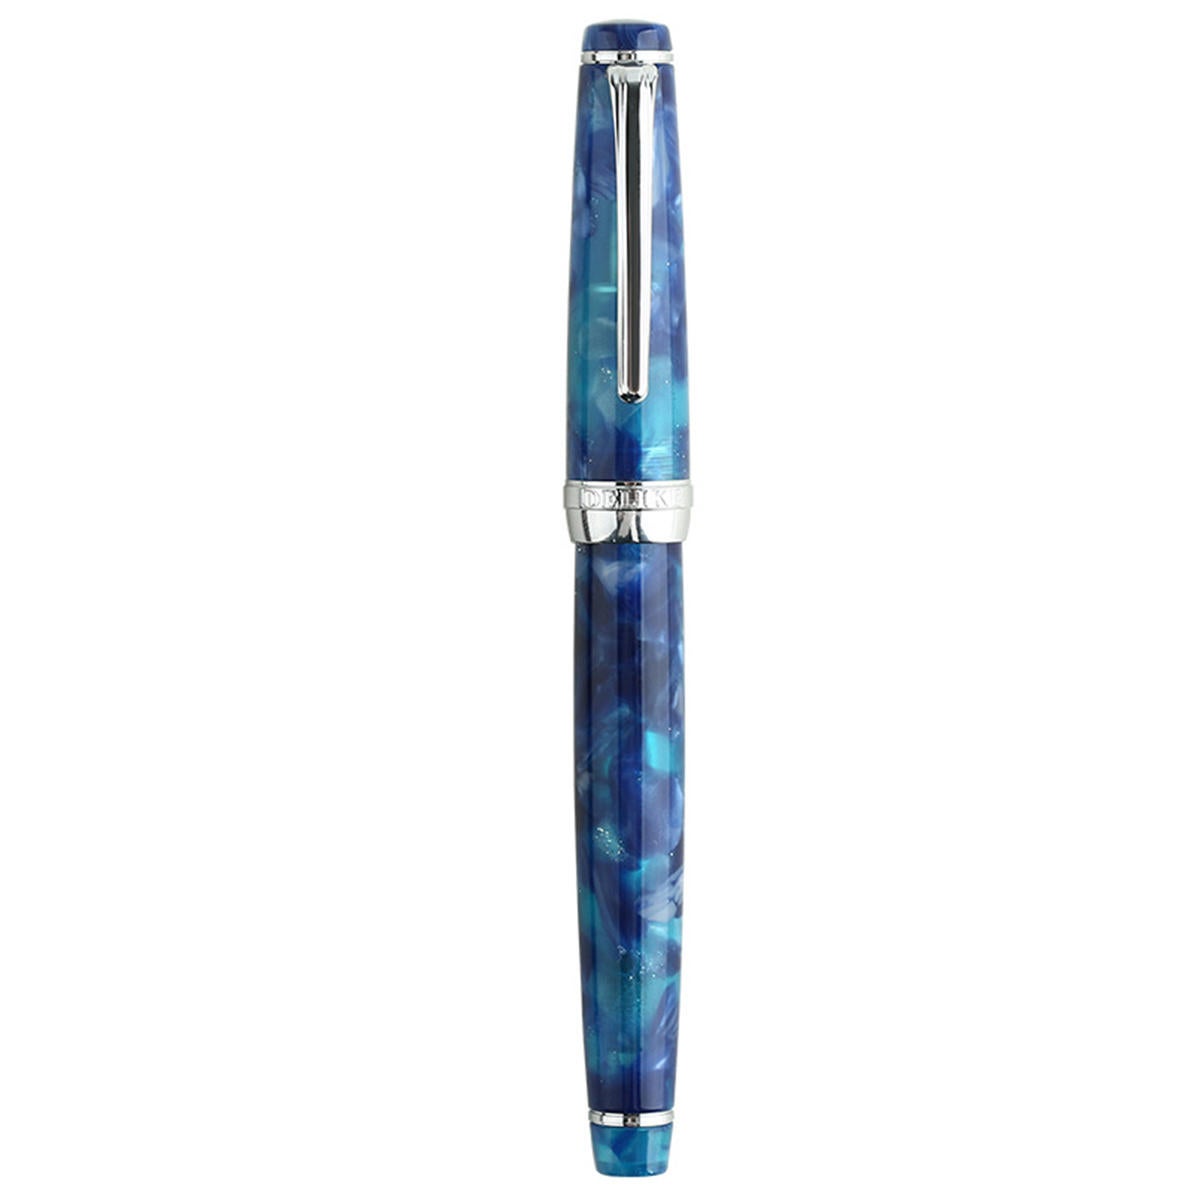 MOONMAN DELIKE Fountain Pen Newmoon Series Acrylic Resin Writing Pen Gift Set for Business Office